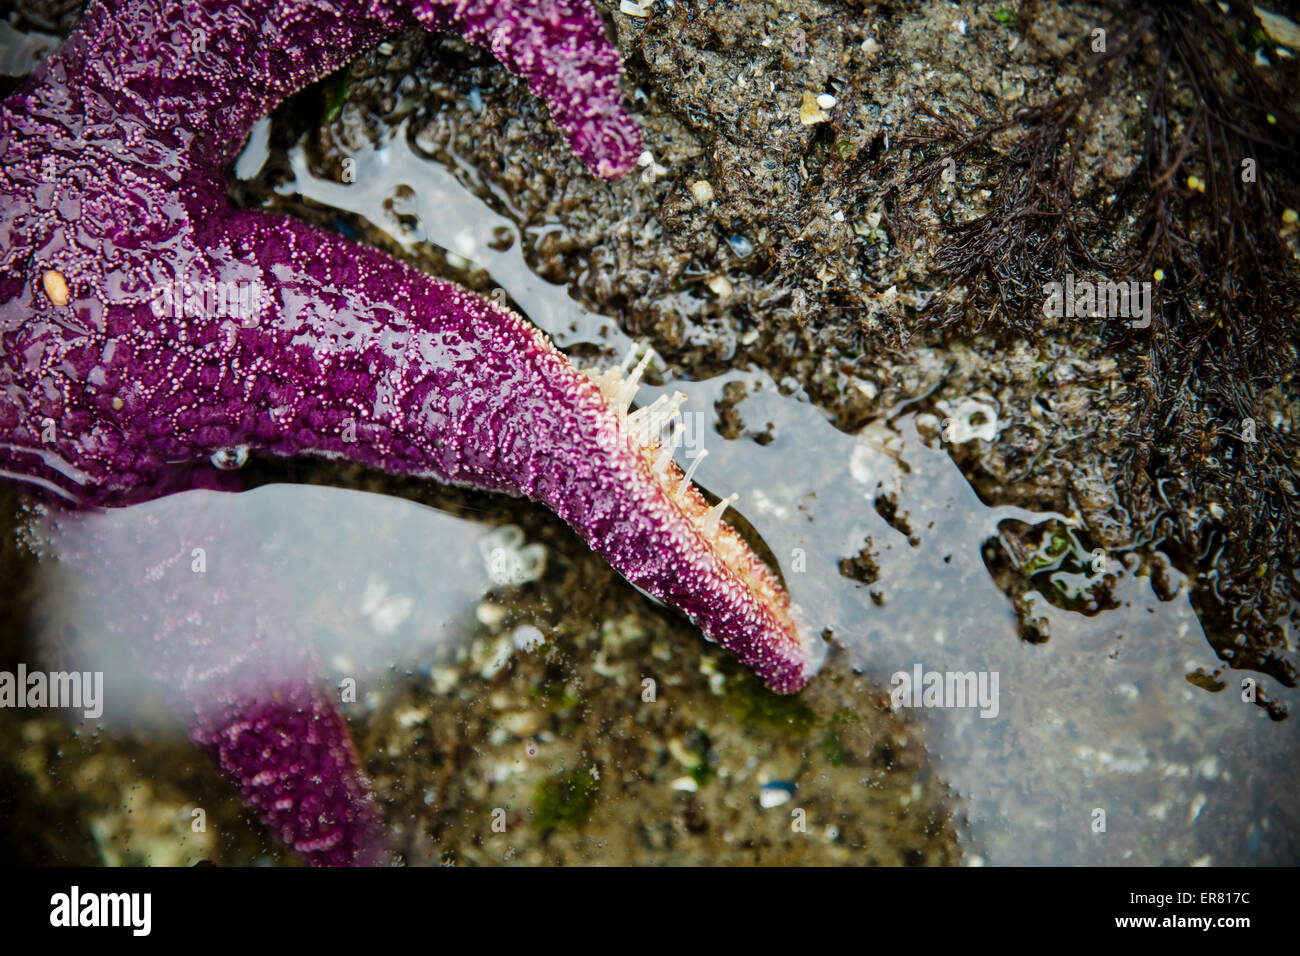 Tentacle tube feet stretch out on one leg of a purple Starfish. Stock Photo